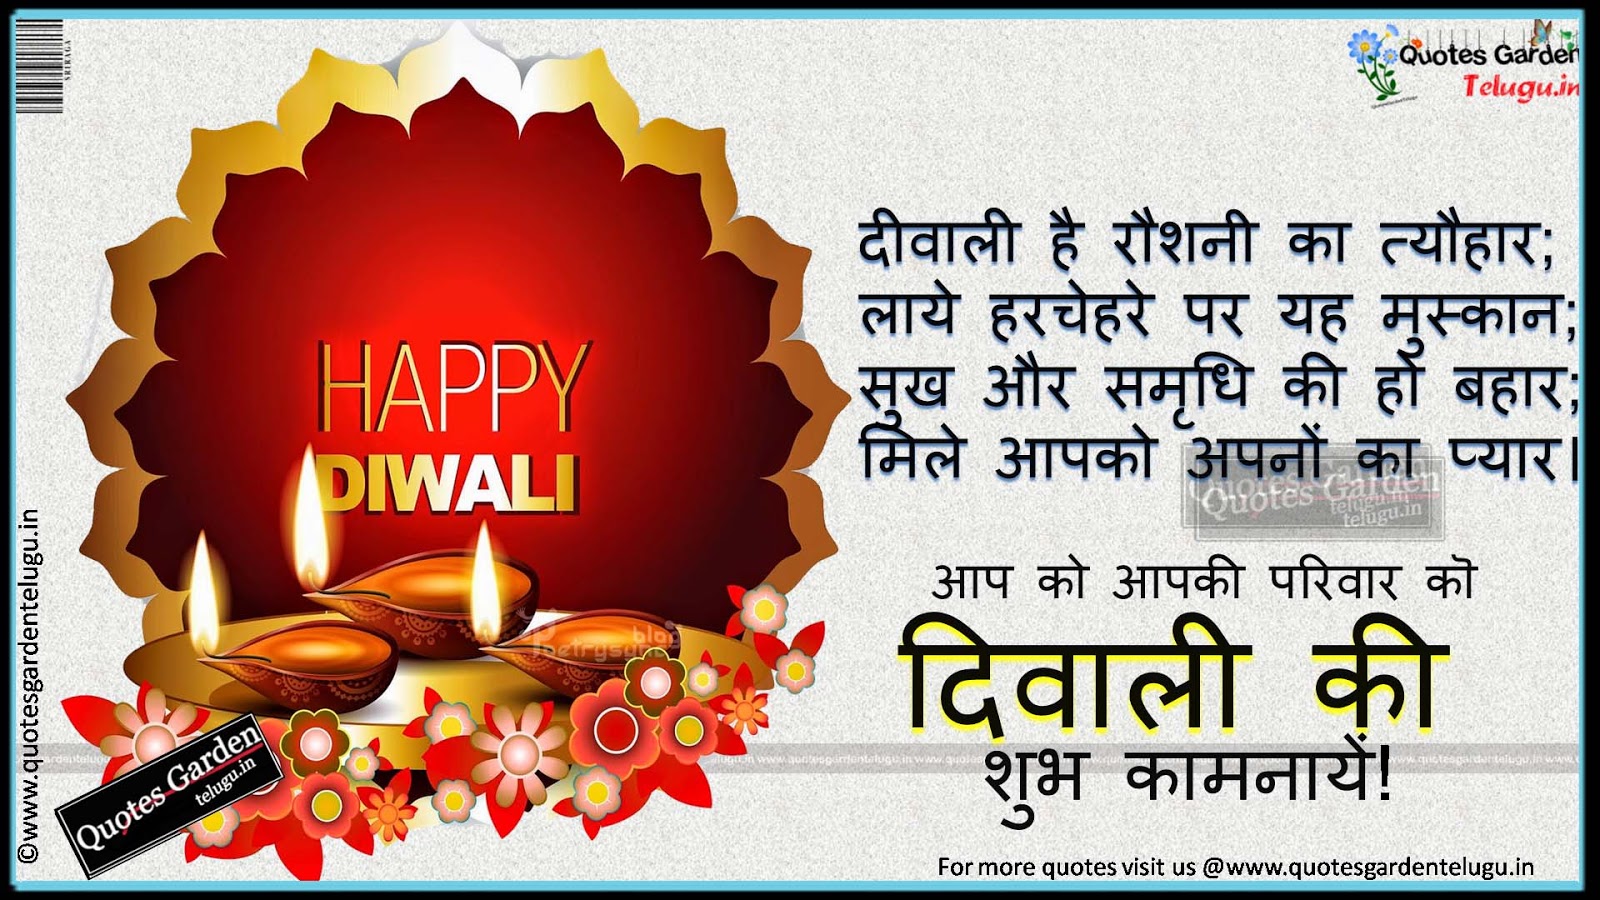 Happy Diwali 2017 Images, Wishes, Messages, Quotes - Diwali Shayari Wallpapers In Hindi , HD Wallpaper & Backgrounds